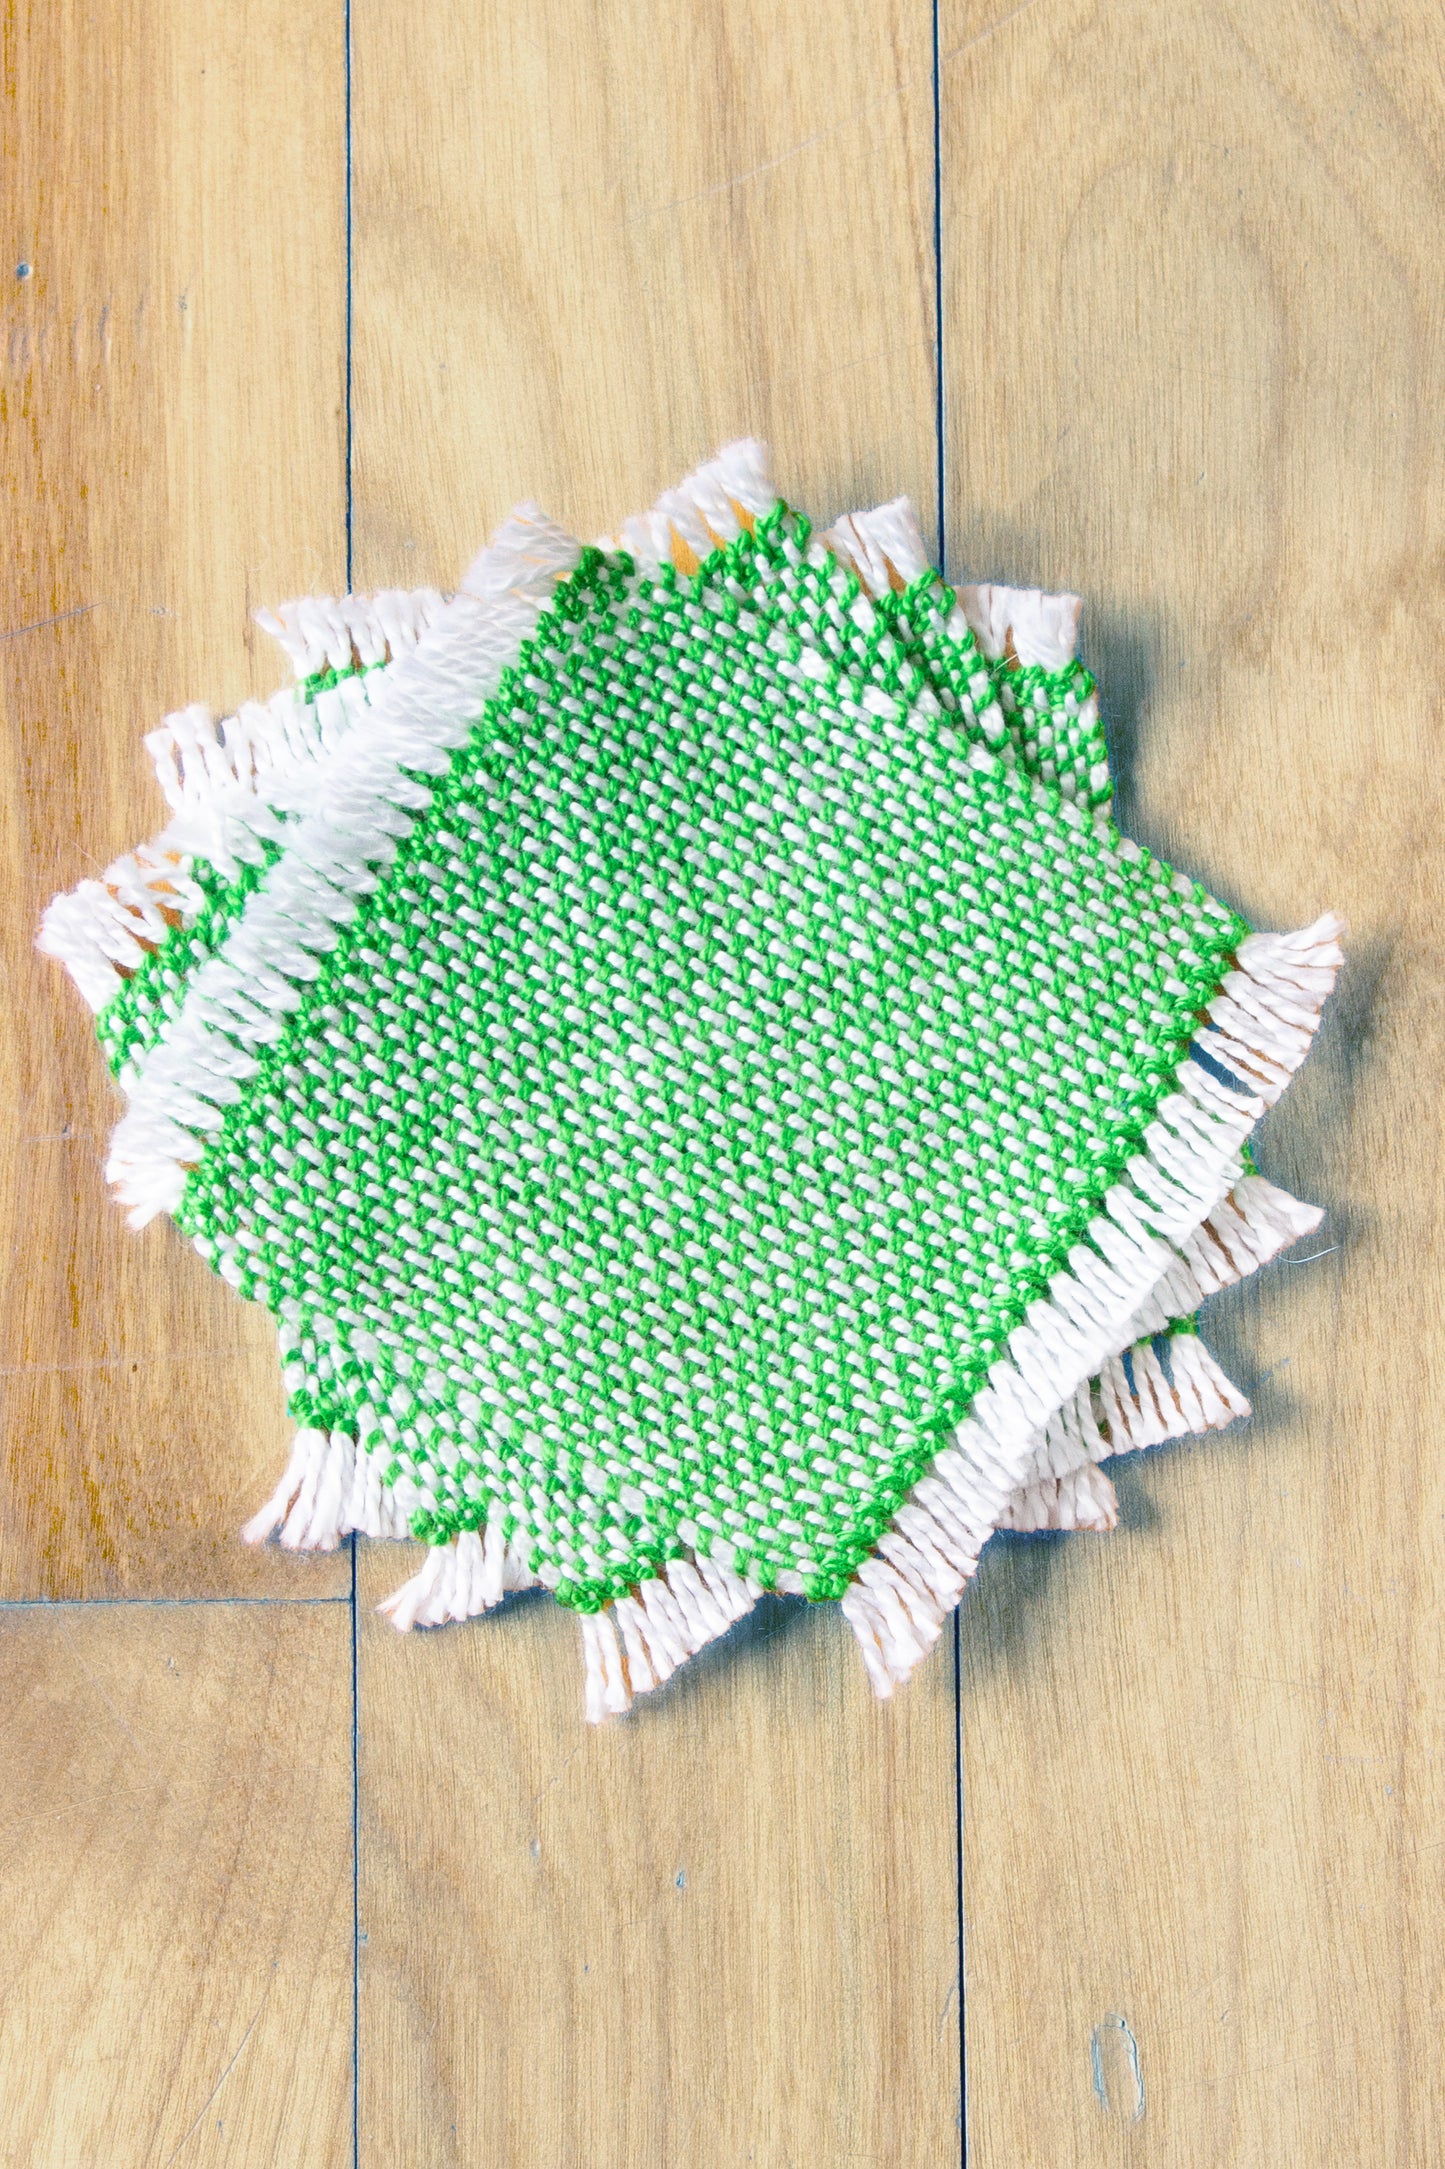 Cotton coasters: Set of four, hemstitched, Green & White, handmade, natural fibres, woven in Canada